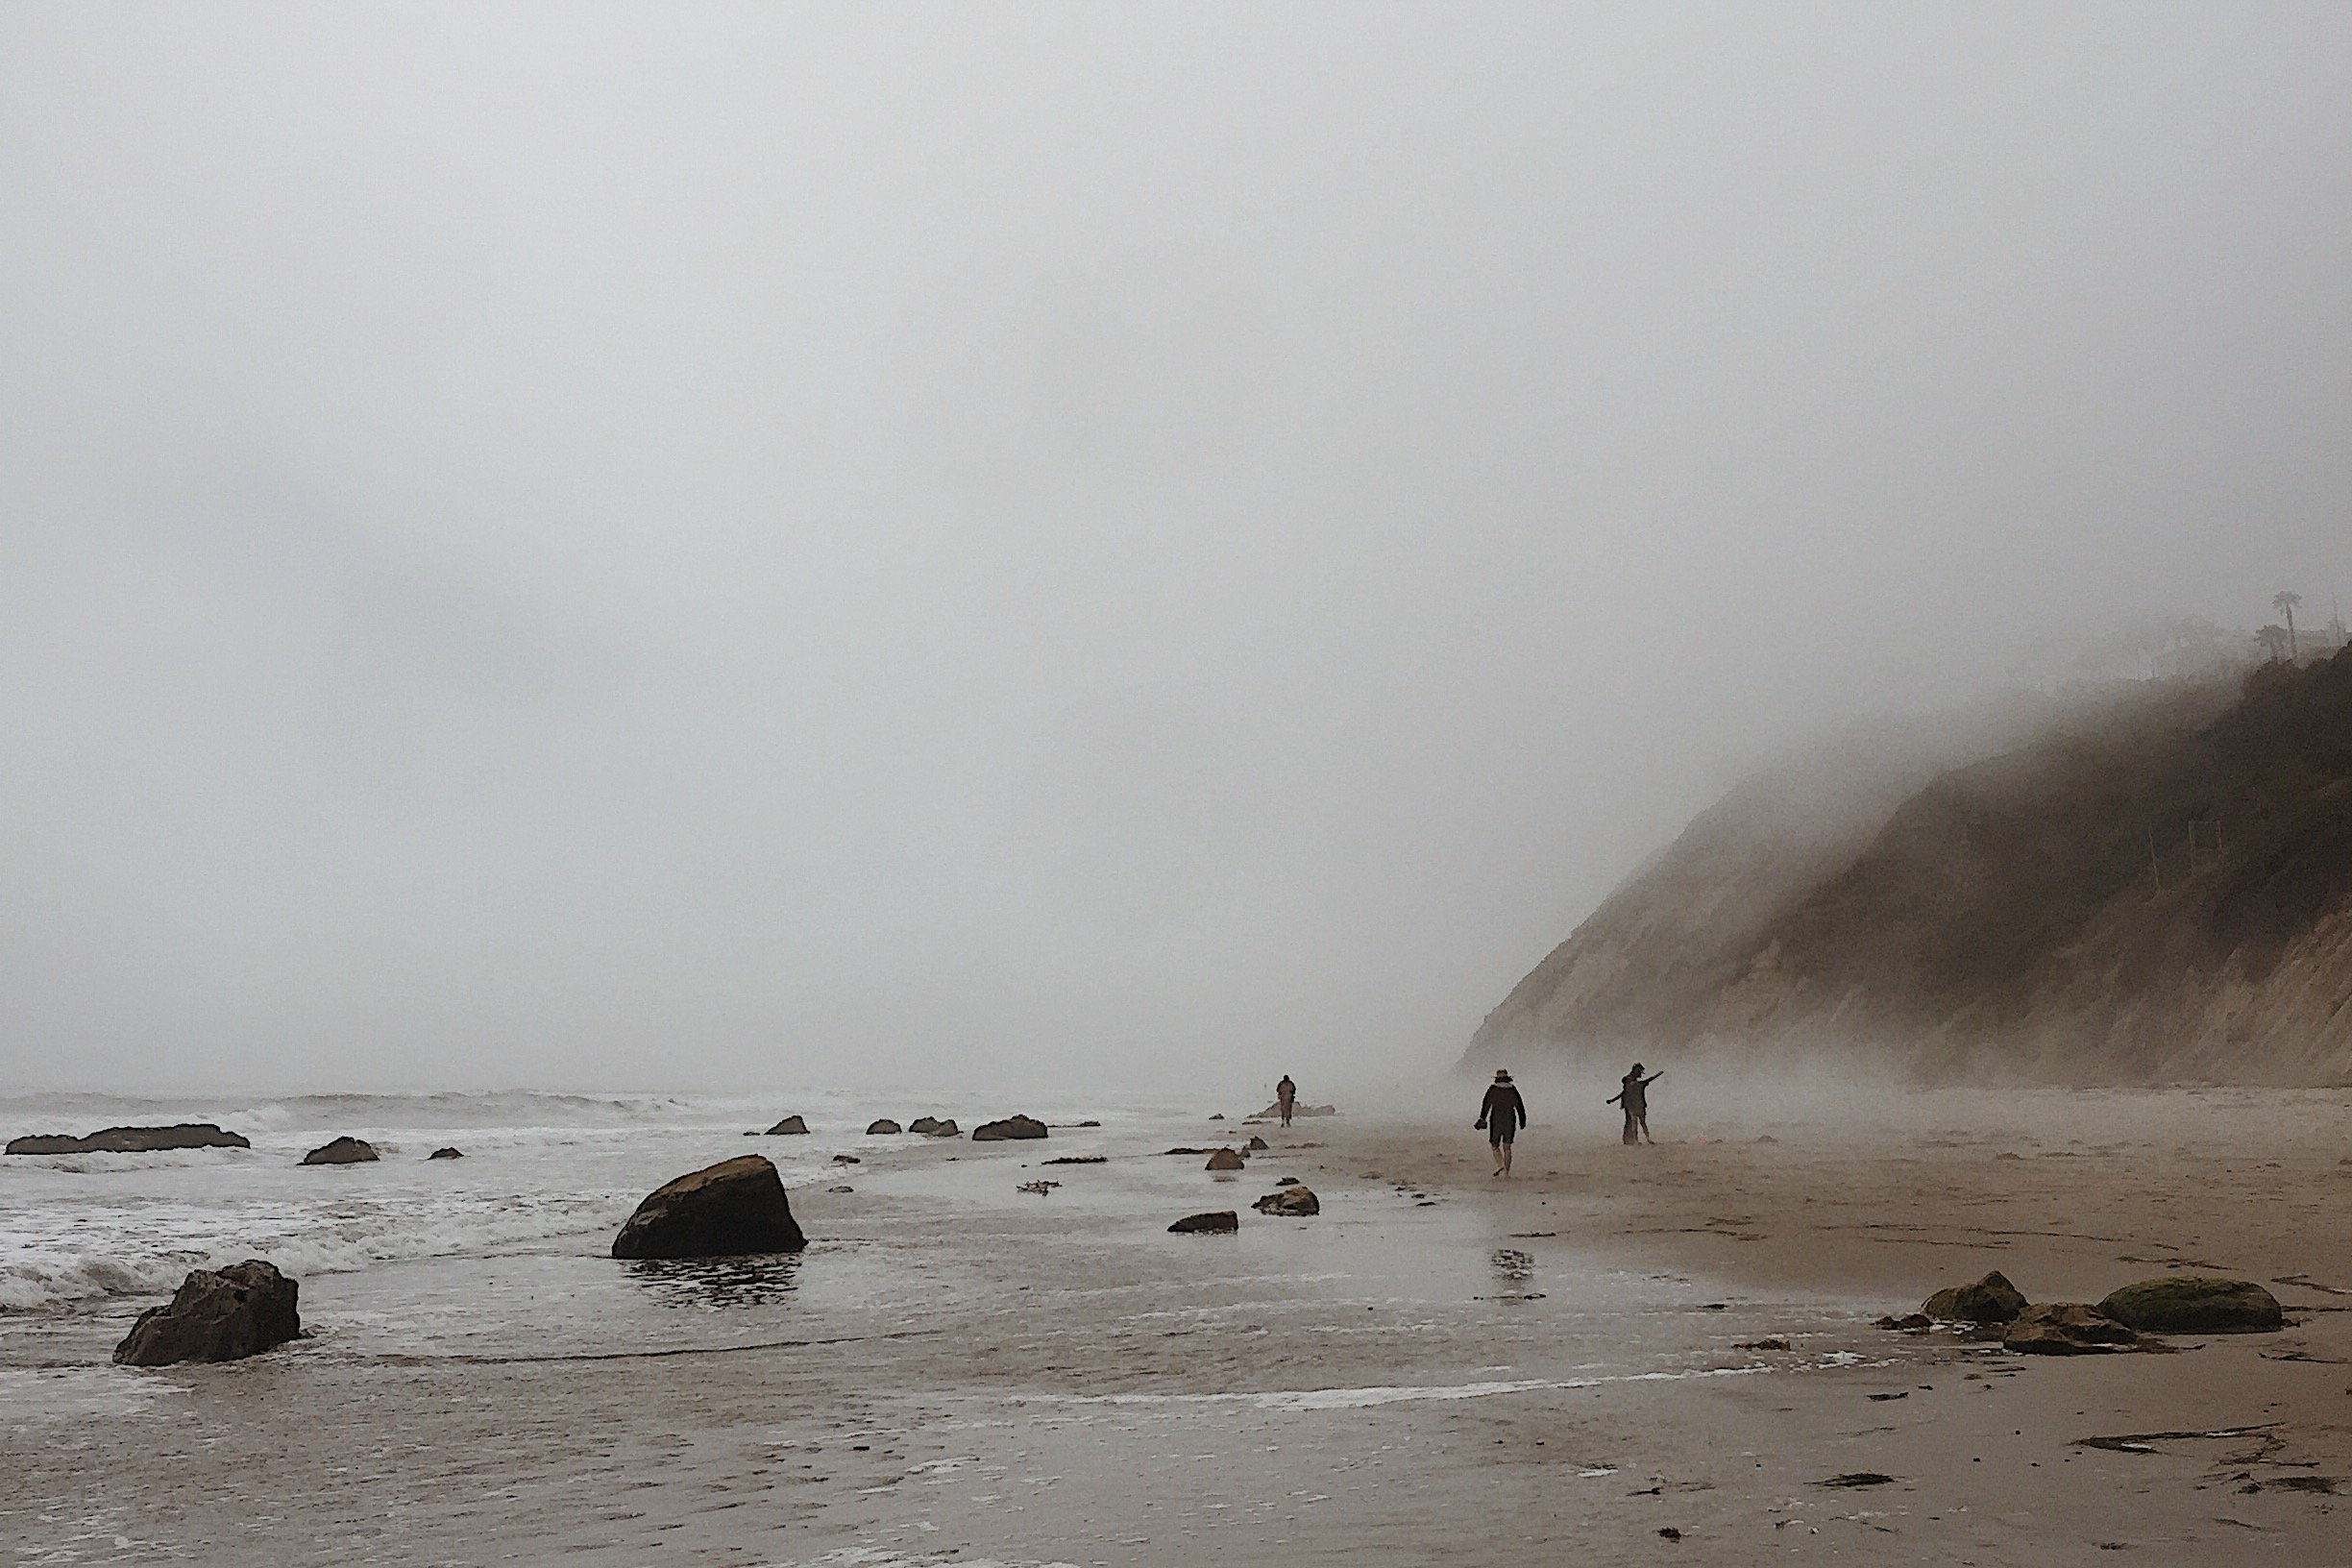 A foggy beach in sepia. There is a cliffside in the distance and four people walking the shore.